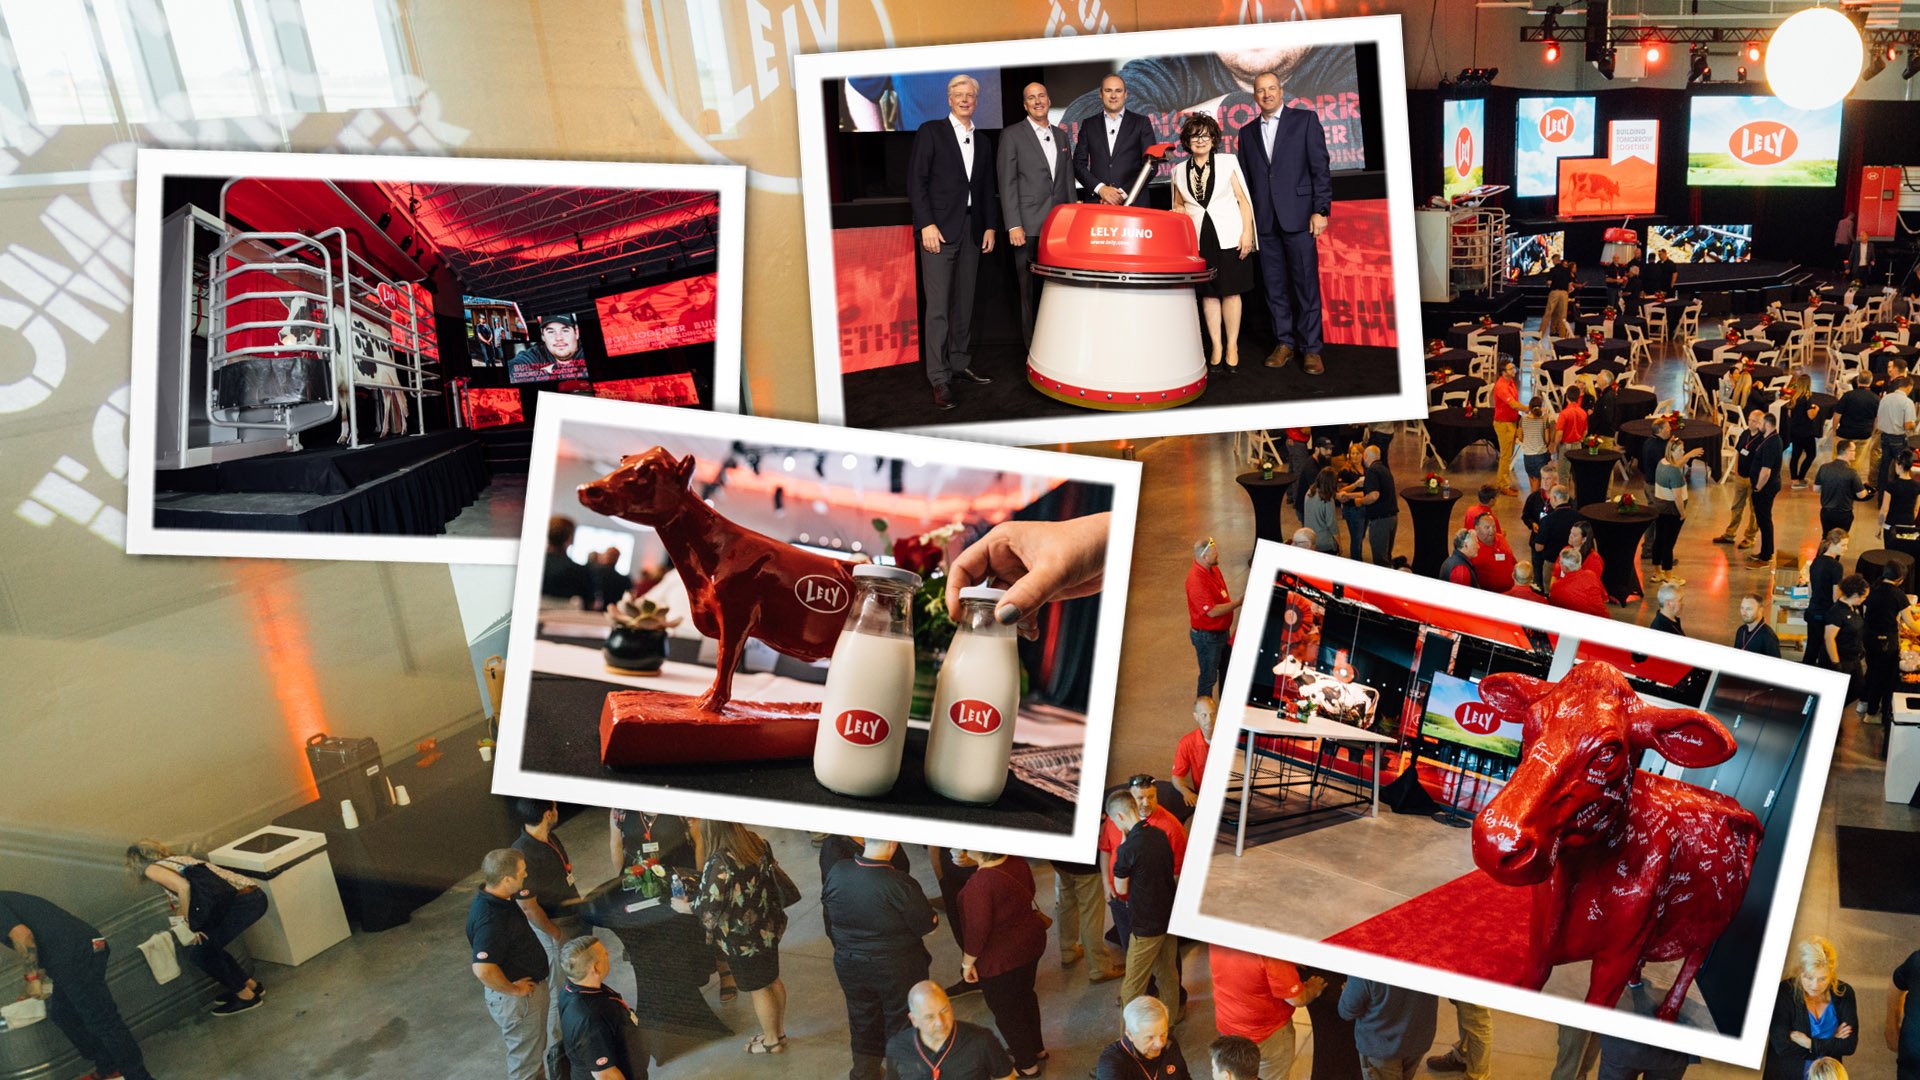 LELY_Grand-Opening_Case Study_1920x1080